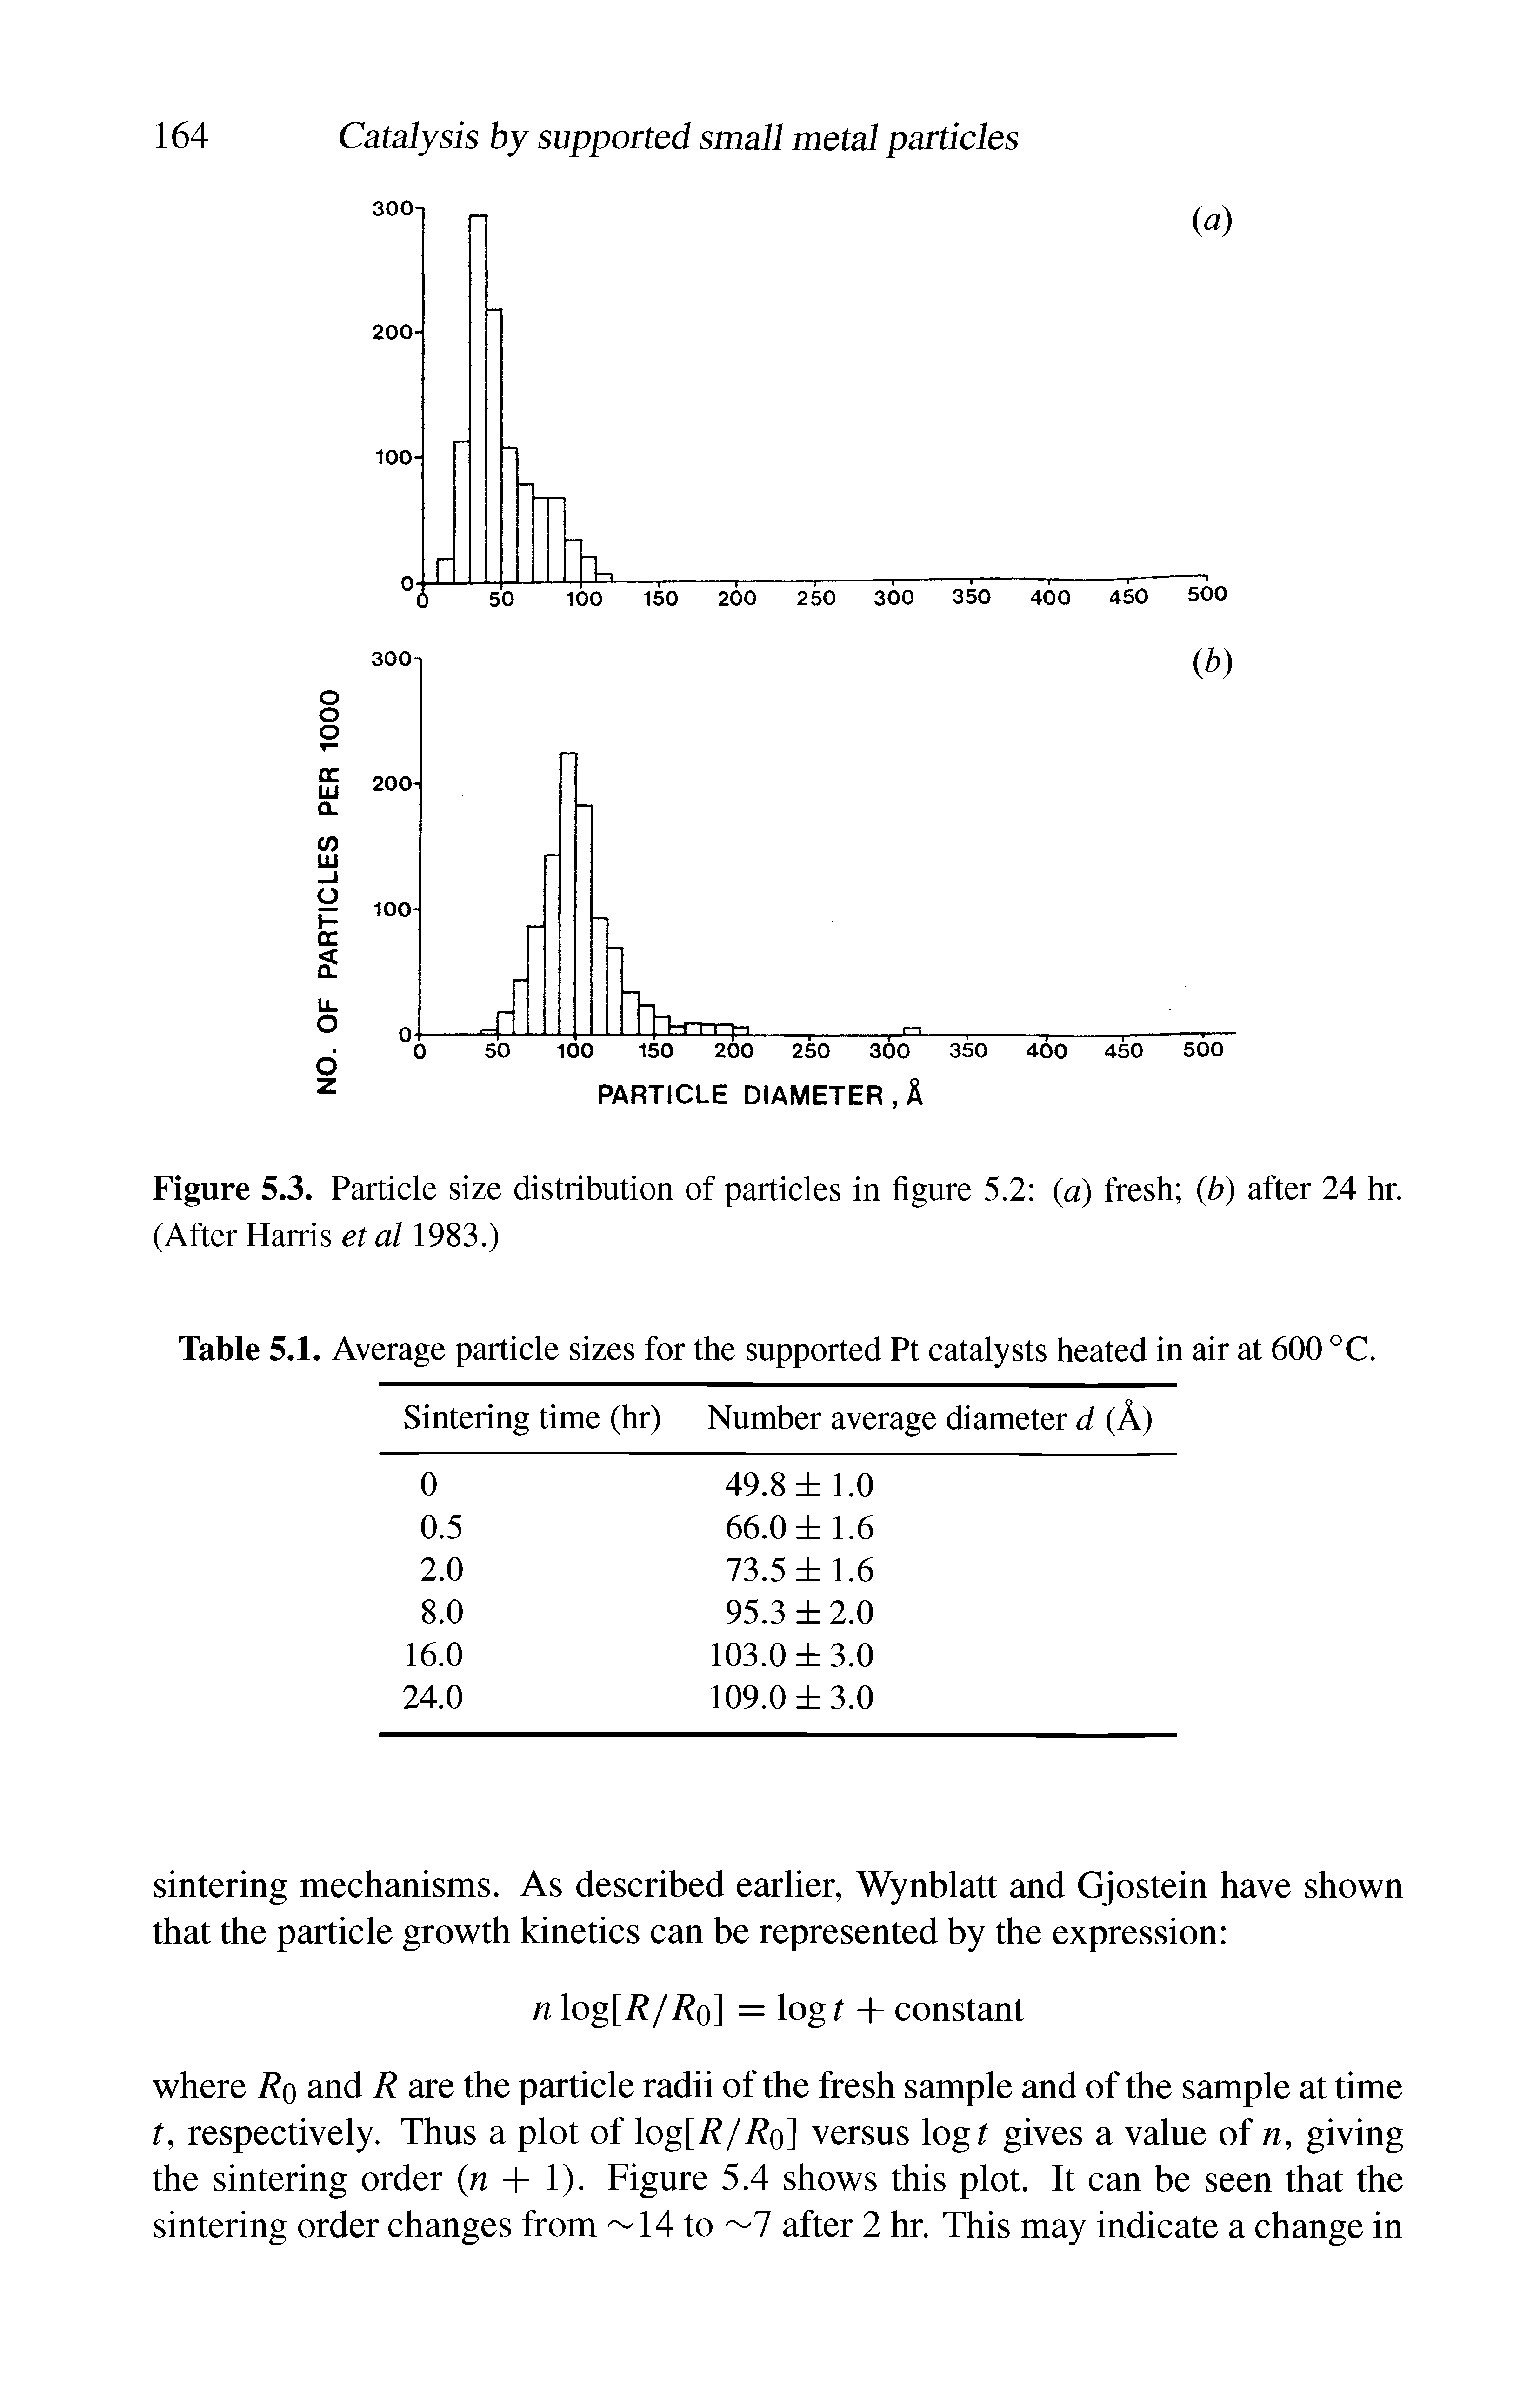 Figure 5.3. Particle size distribution of particles in figure 5.2 (a) fresh (b) after 24 hr. (After Harris et al 1983.)...